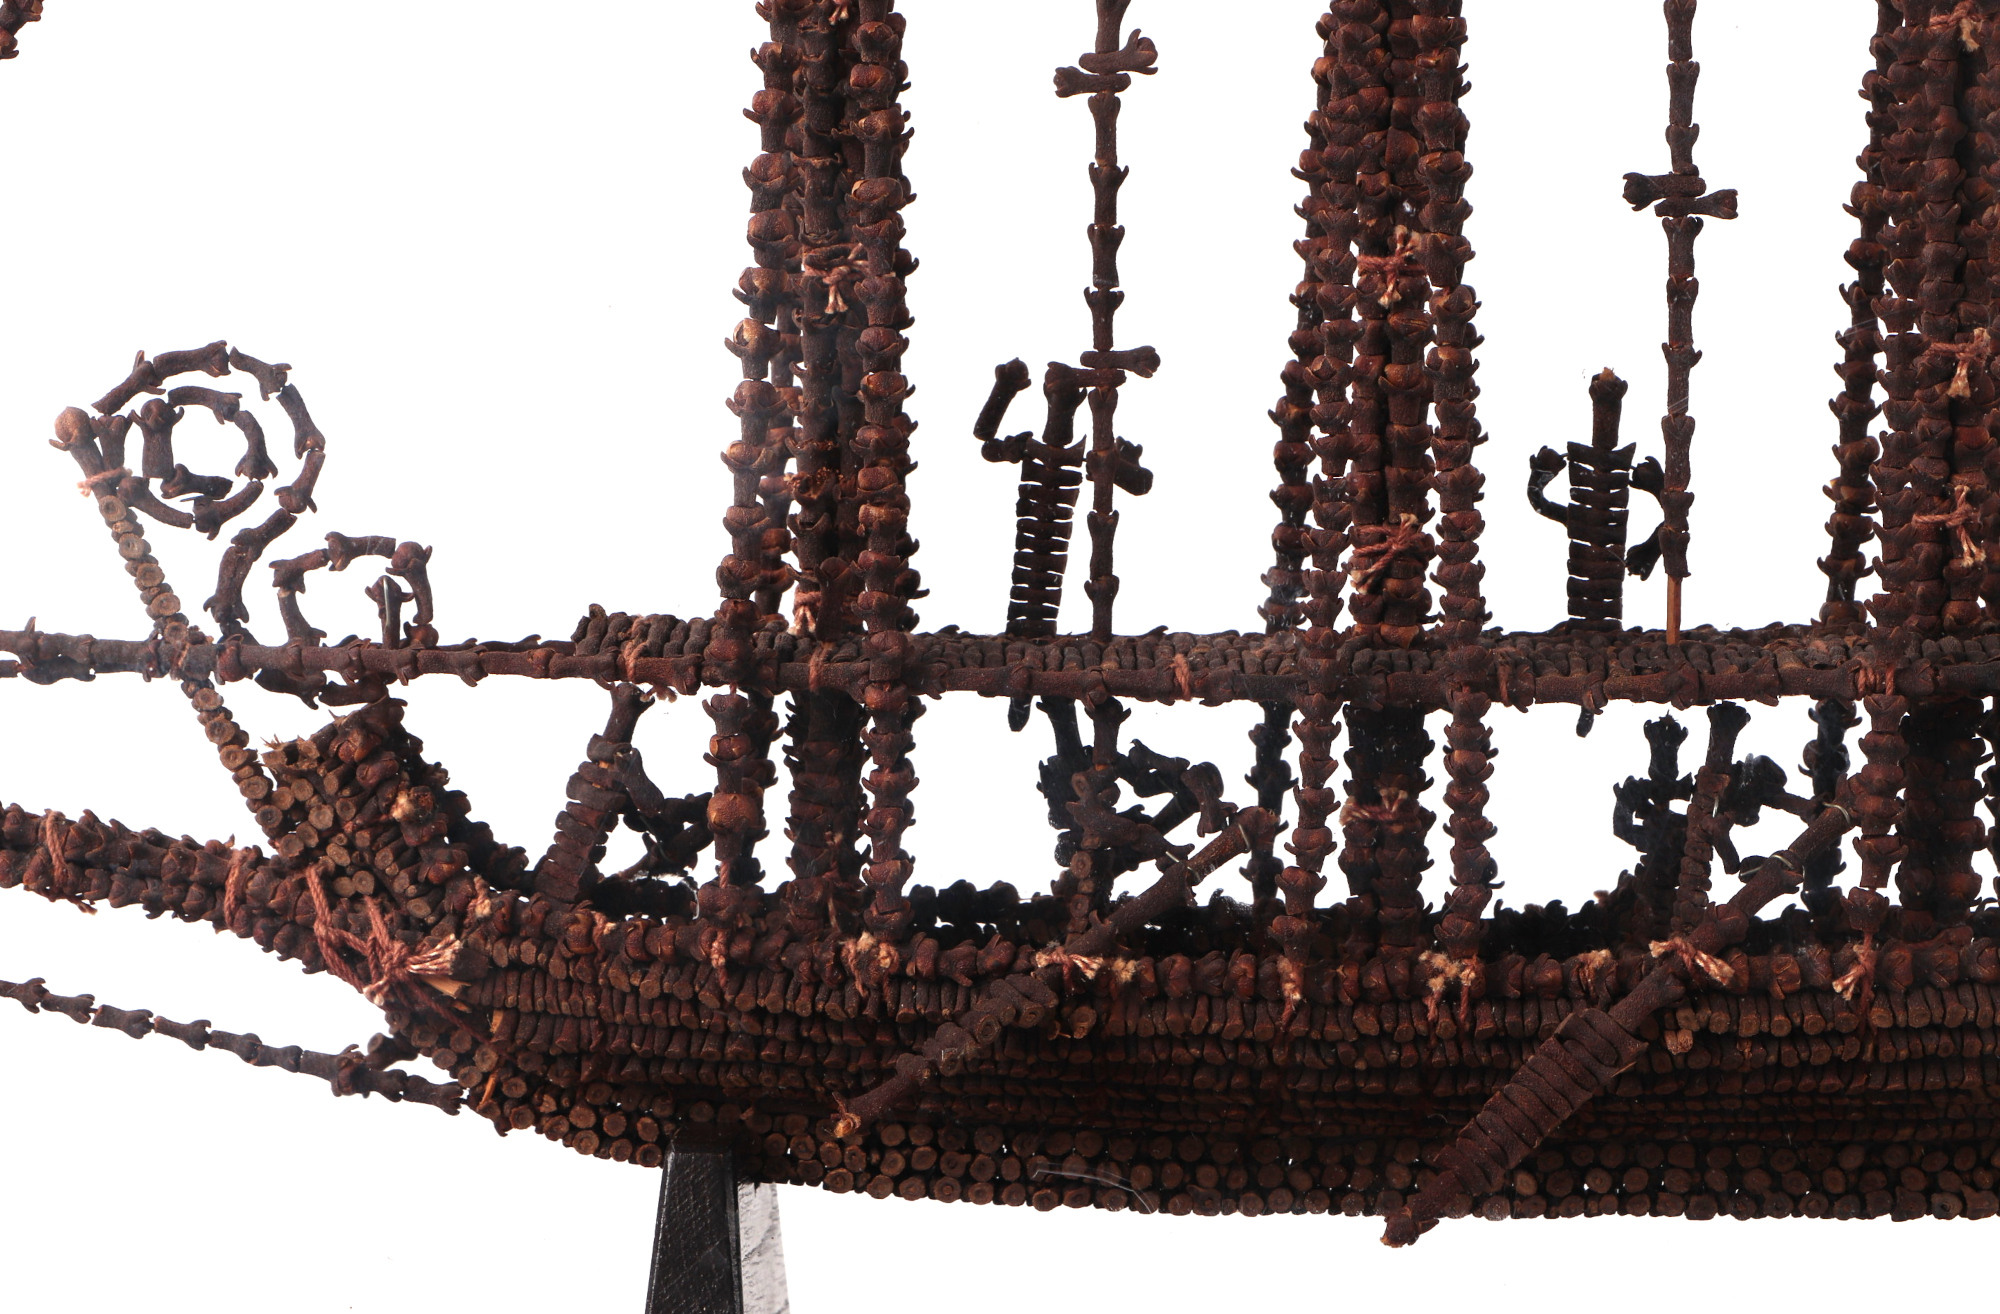 Spice Trade interest – a Moluccas Spice Islands model of a two-masted European sailing ship made - Bild 4 aus 4